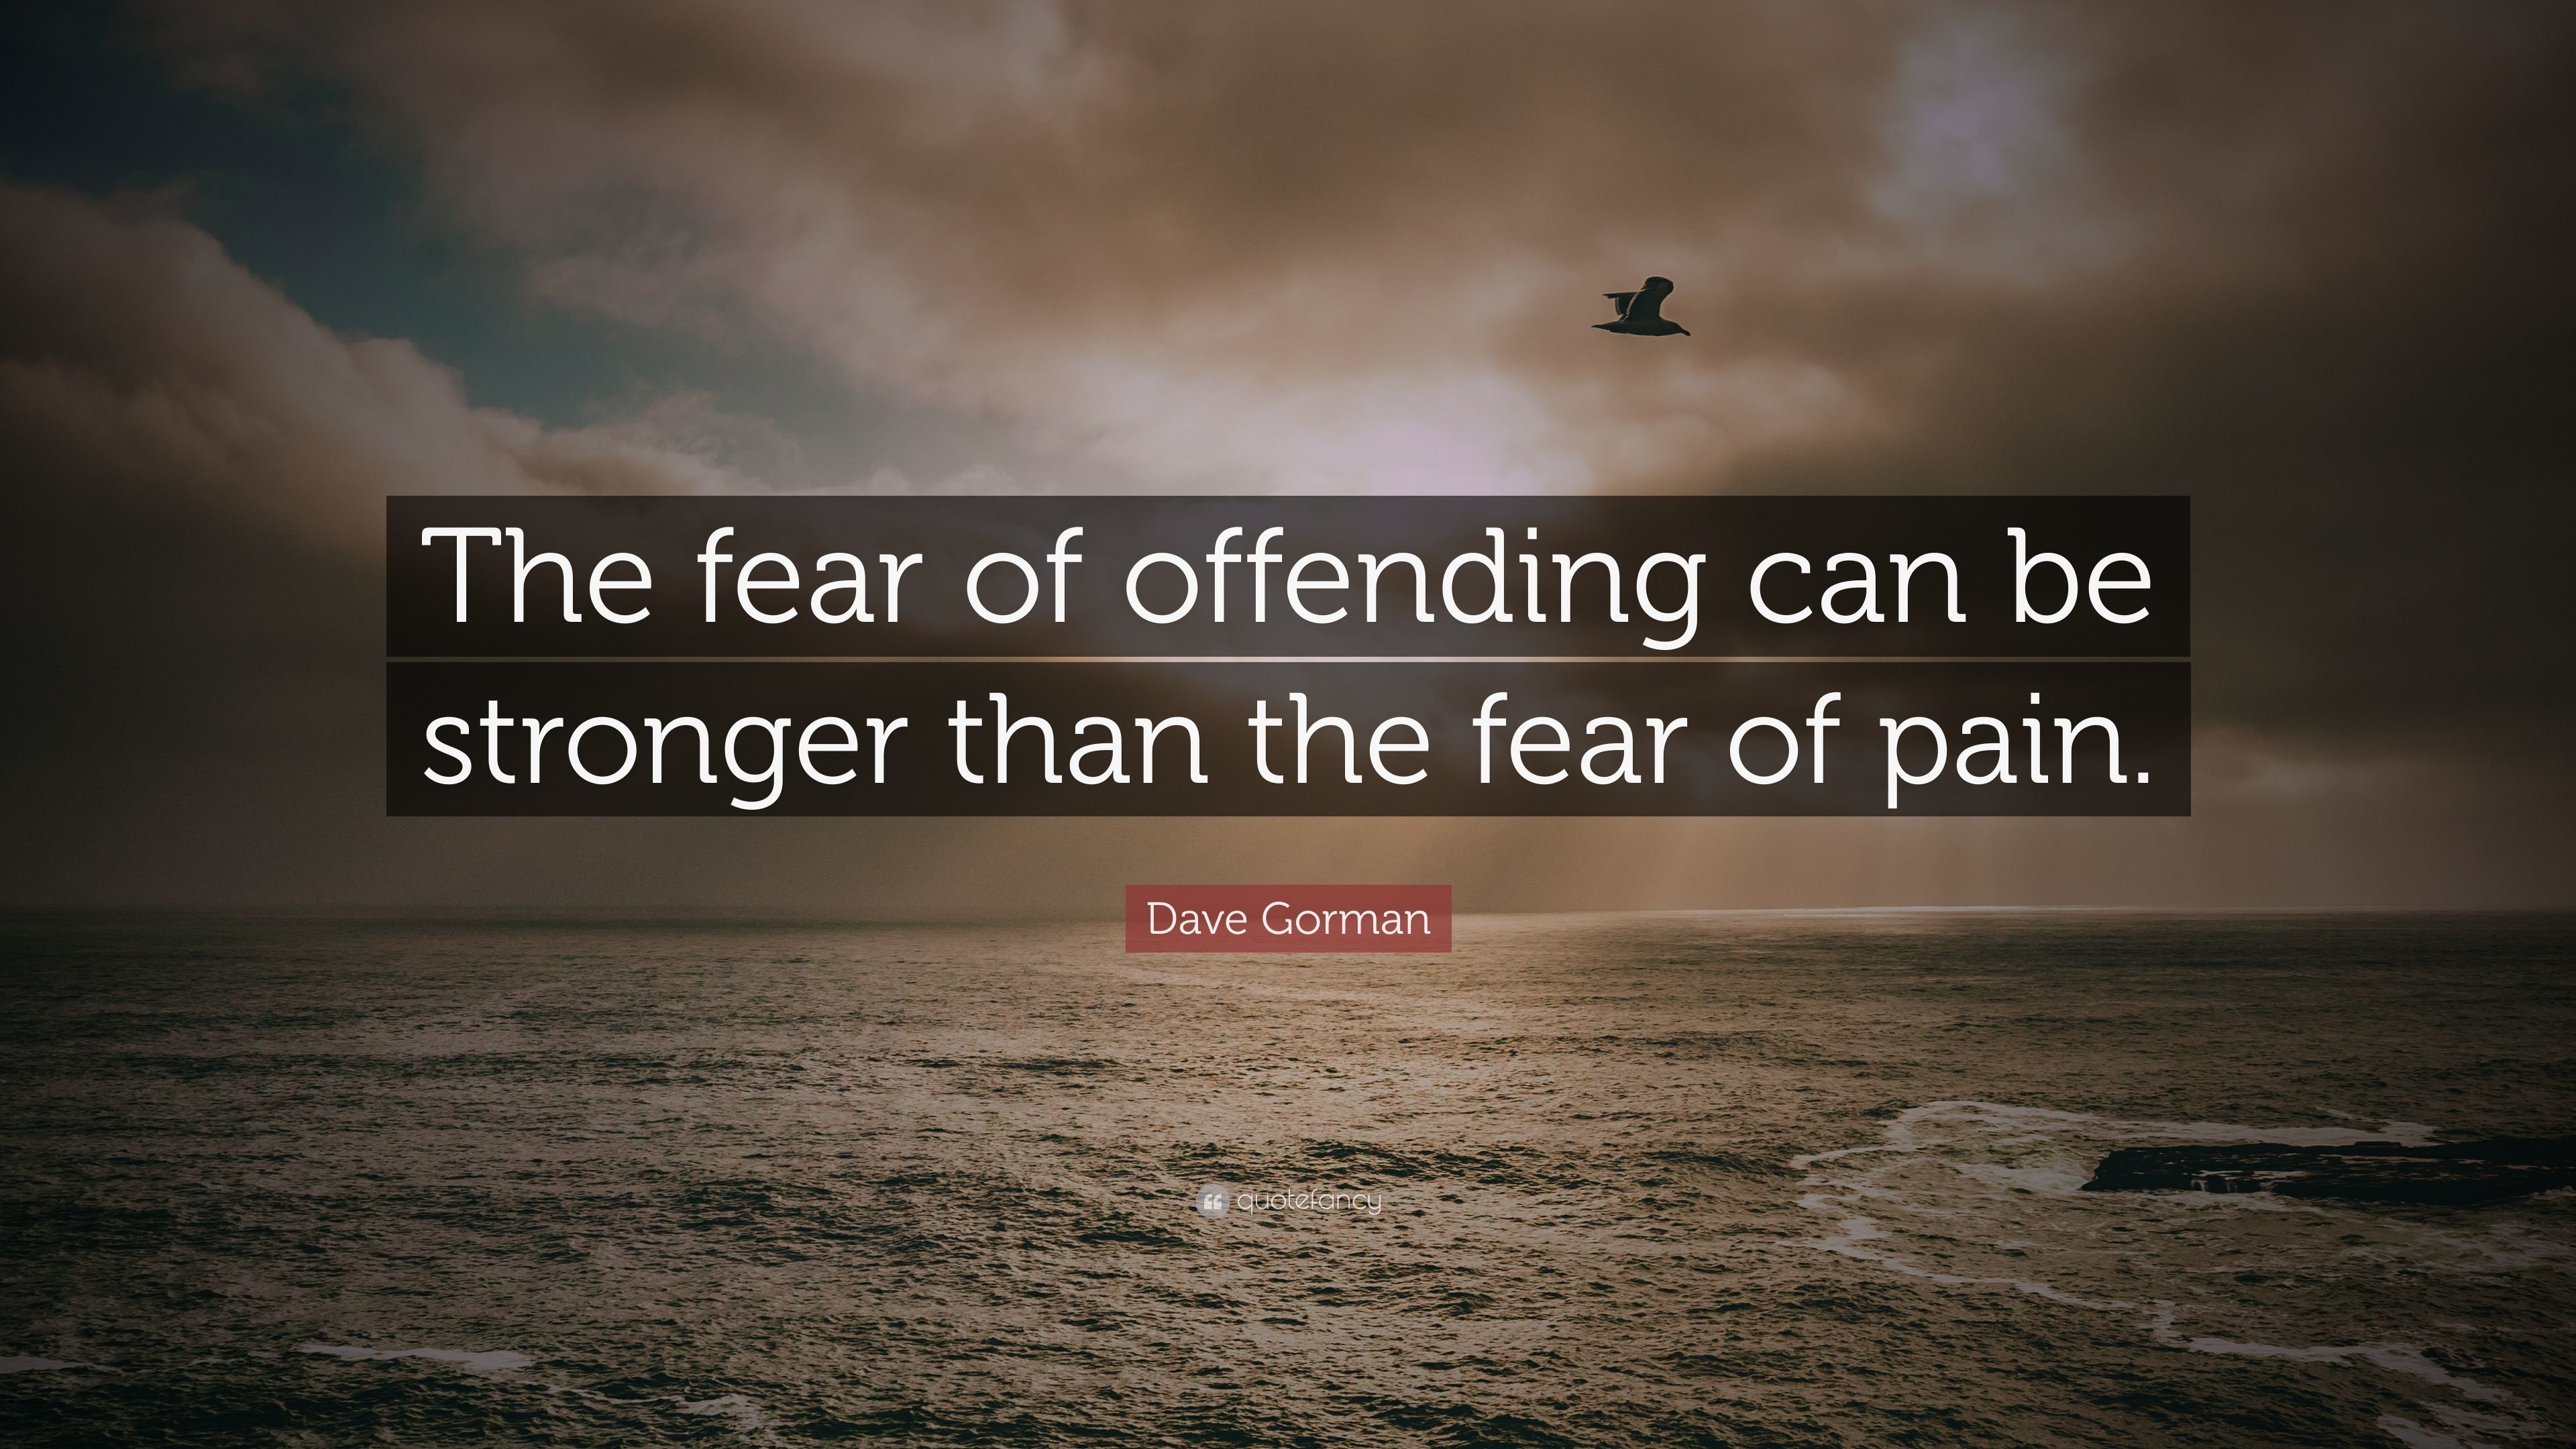 3840x2160 Dave Gorman Quote: “The fear of offending can be stronger than the fear of